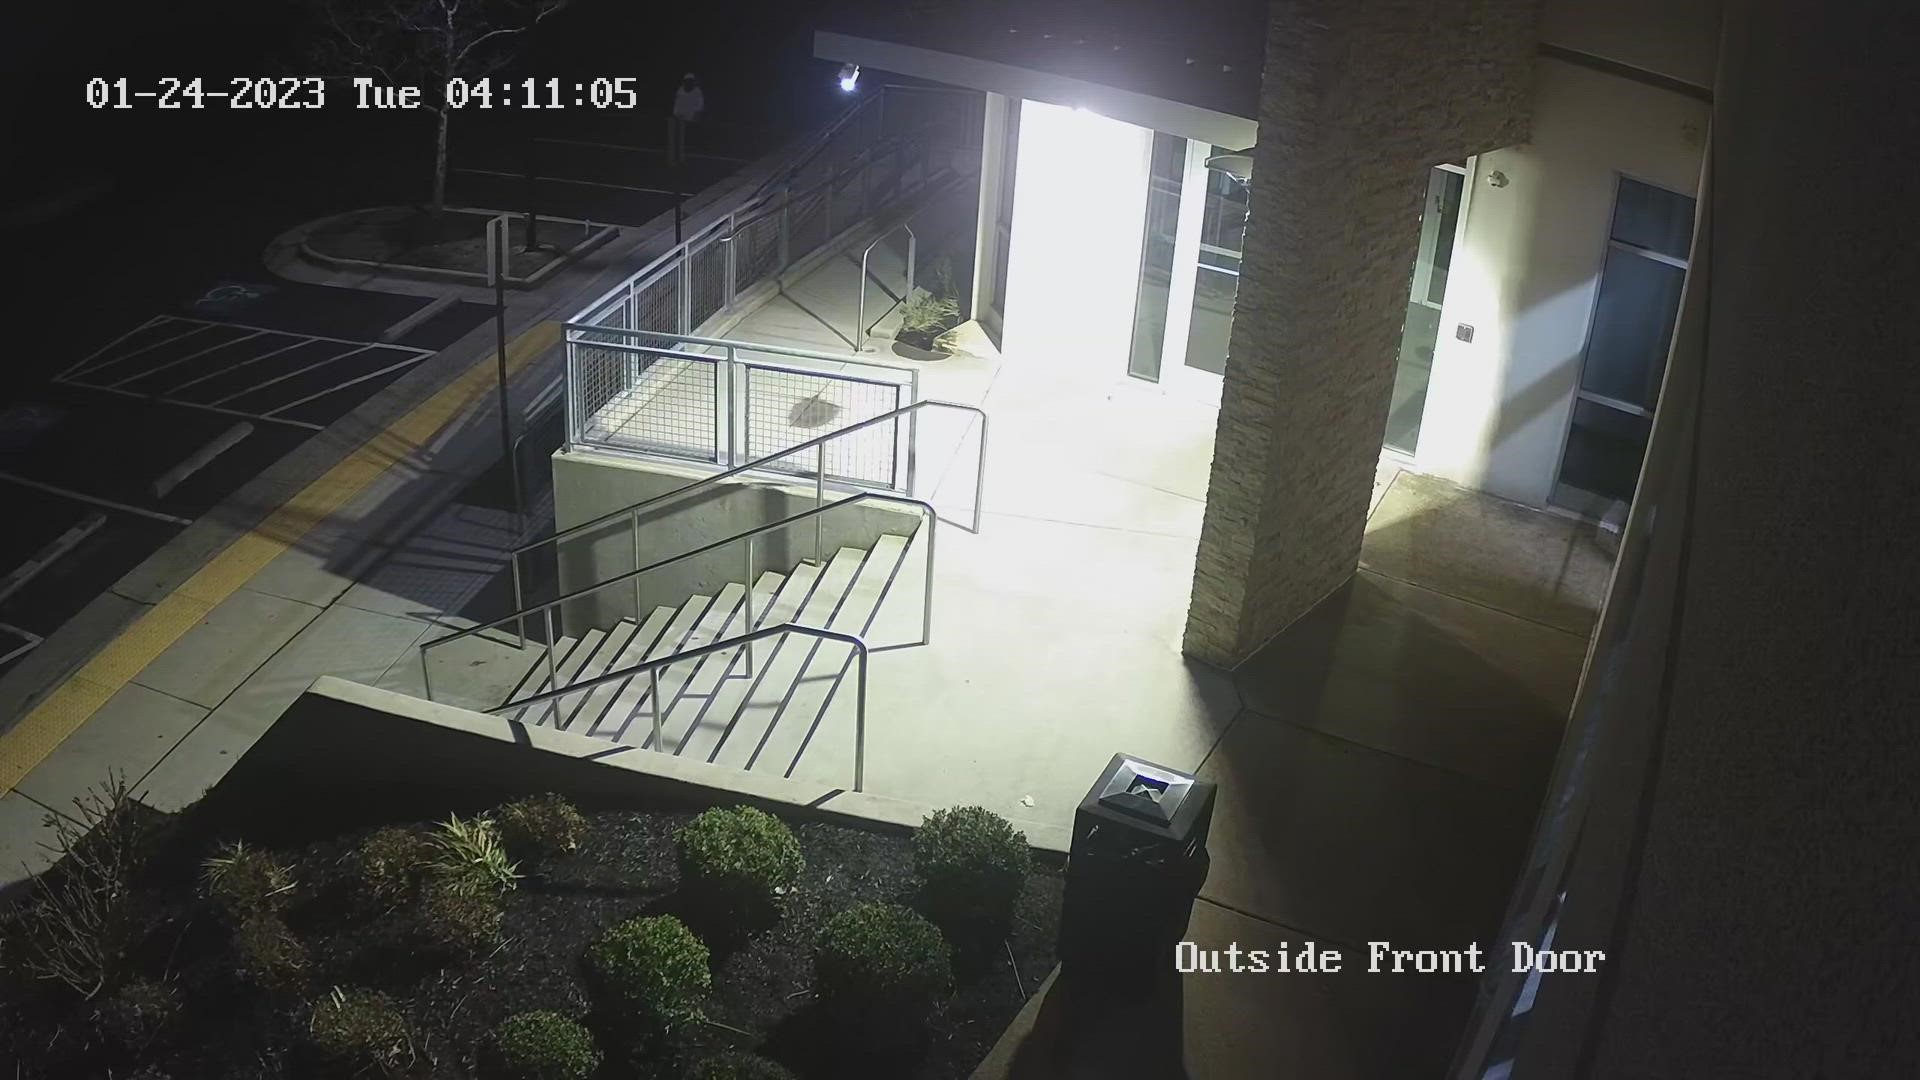 Deputies are searching for two suspects caught on camera.